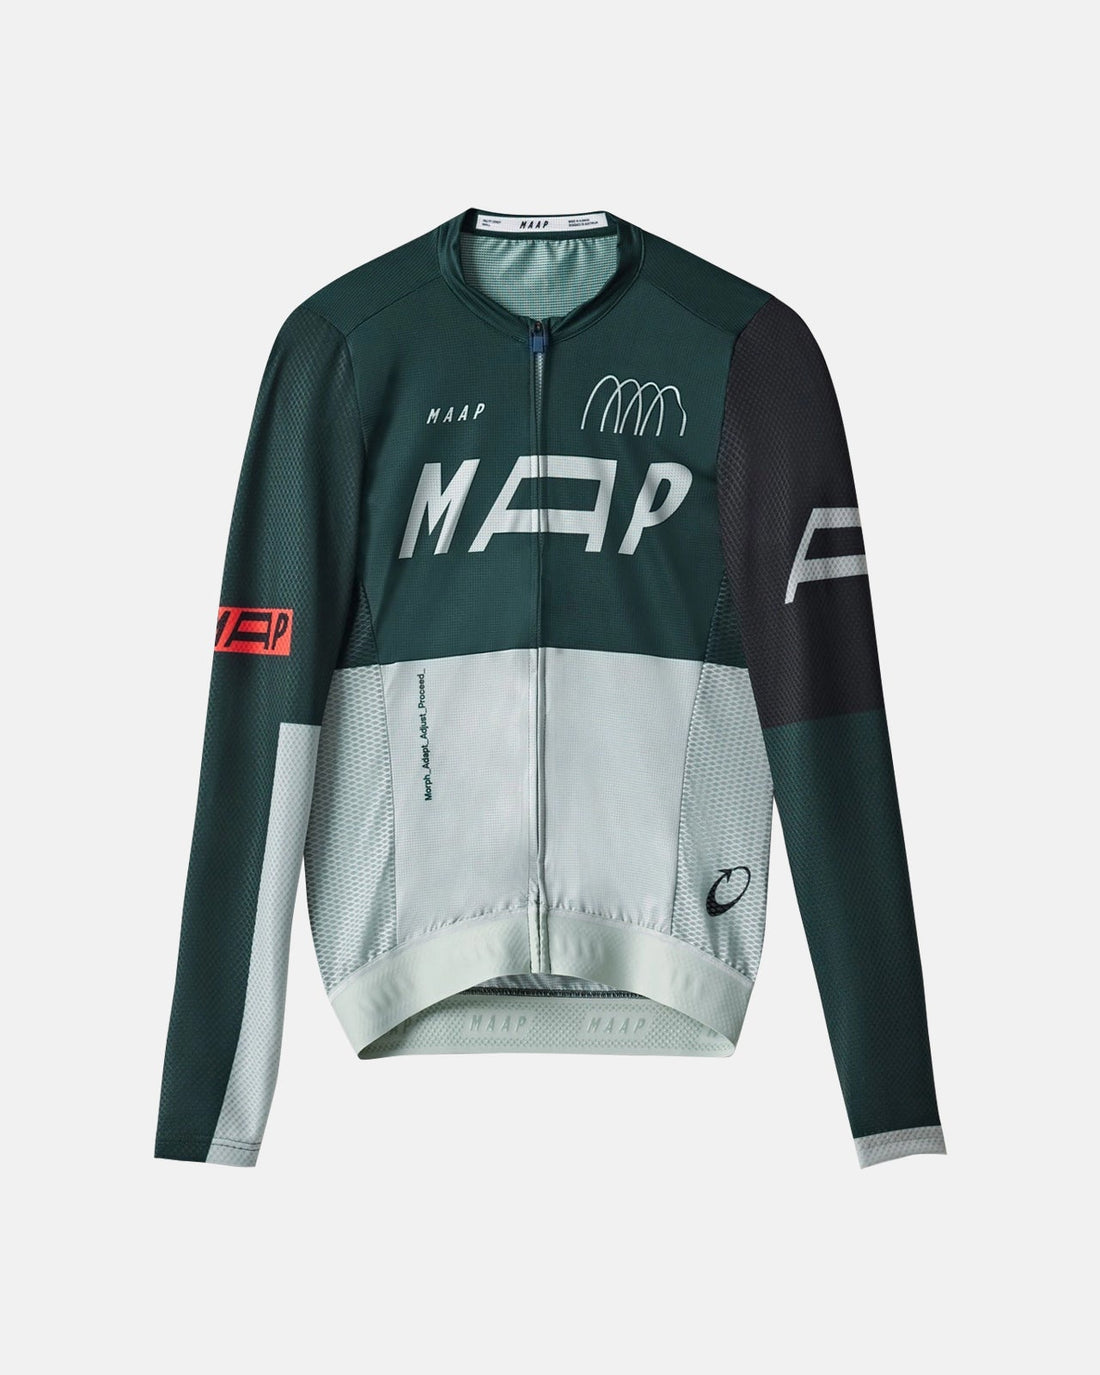 Adapt Pro Air LS Jersey - Sycamore - MAAP